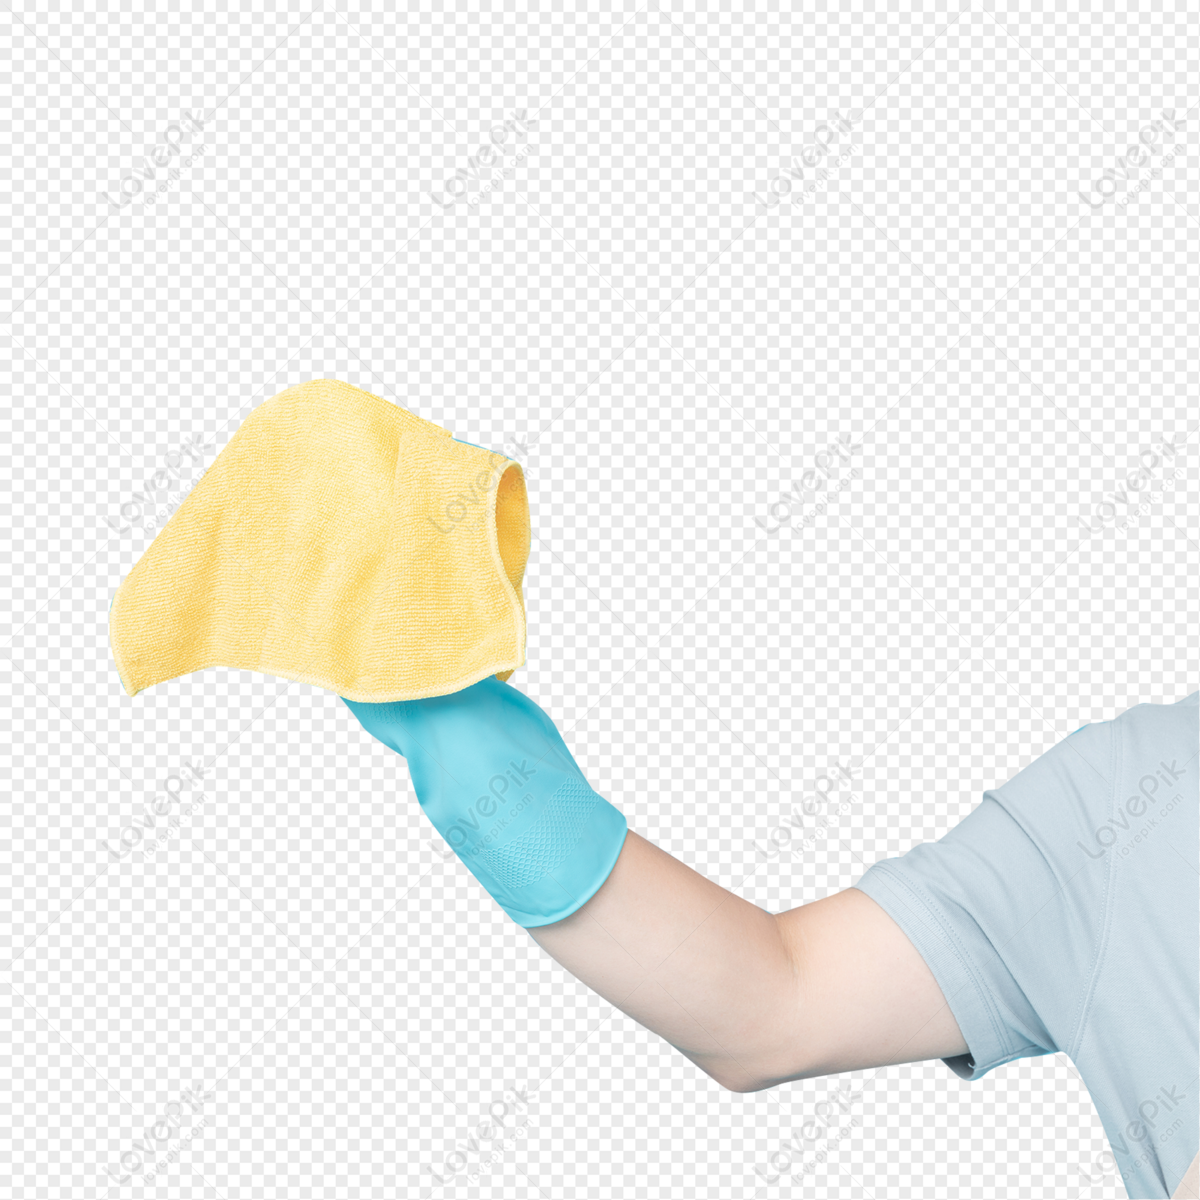 Hands Holding Cleaning Rag Microfiber Cloth Isolated on White Background  Stock Photo - Image of garage, home: 164874824